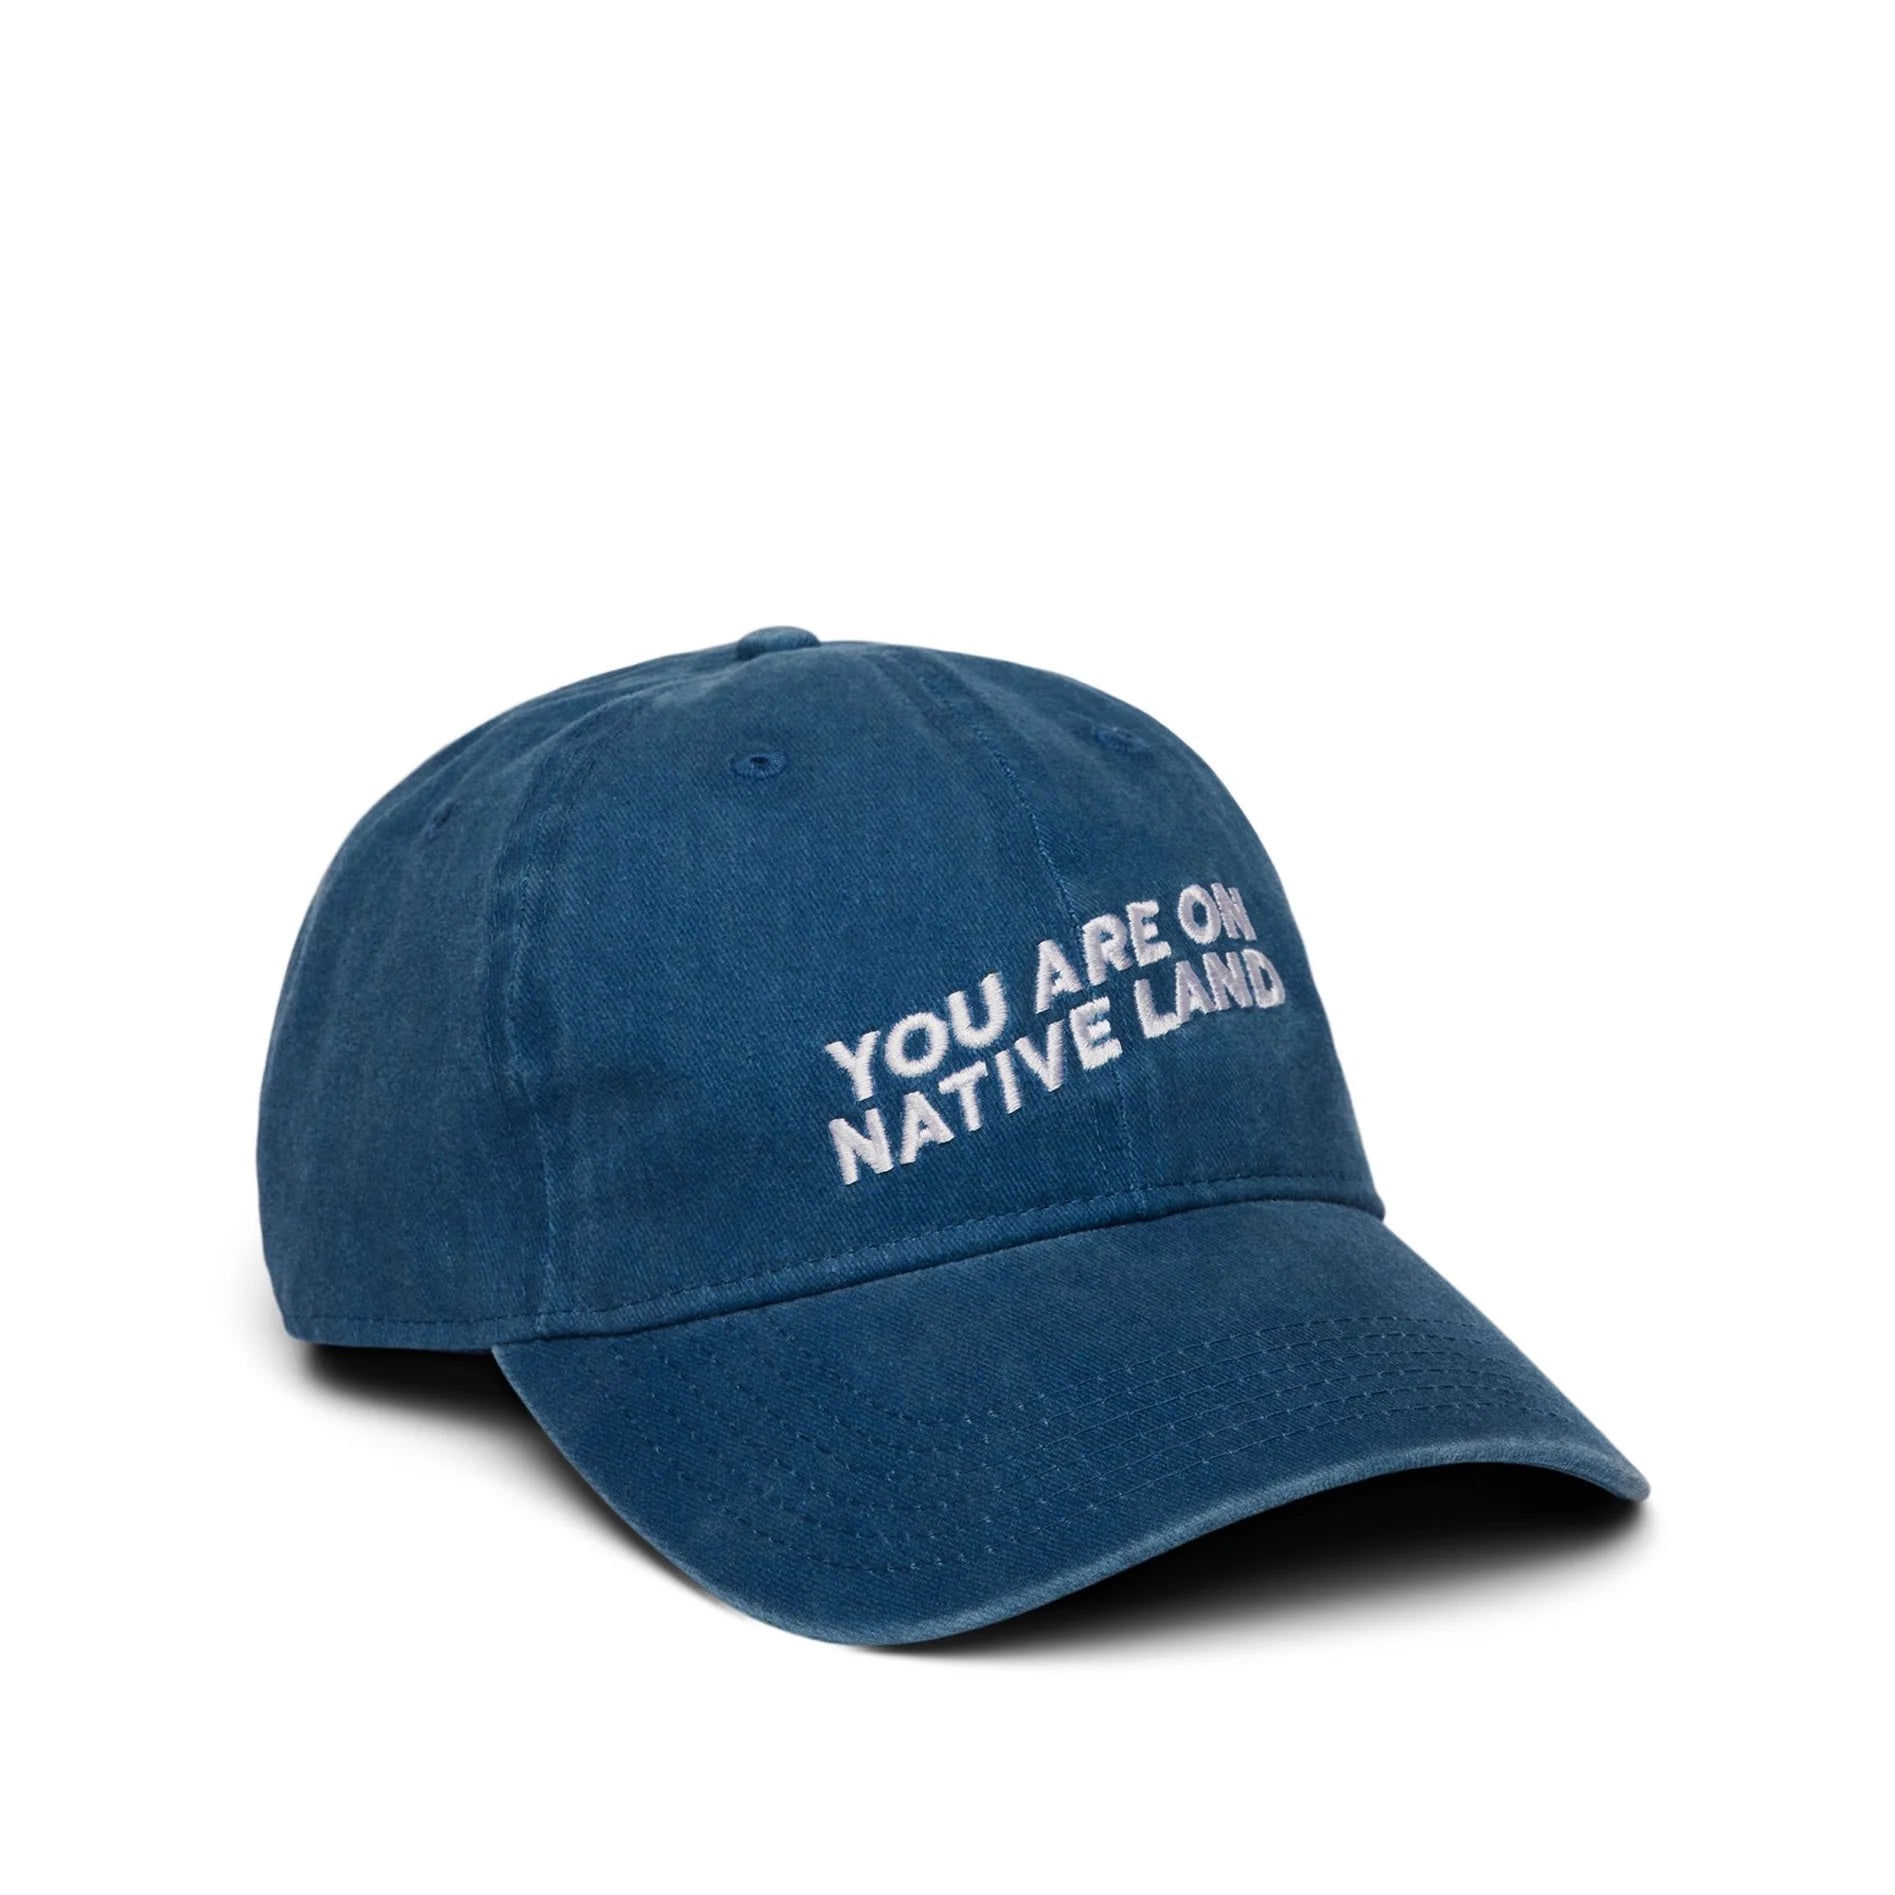 "You Are On Native Land" Blue Cap